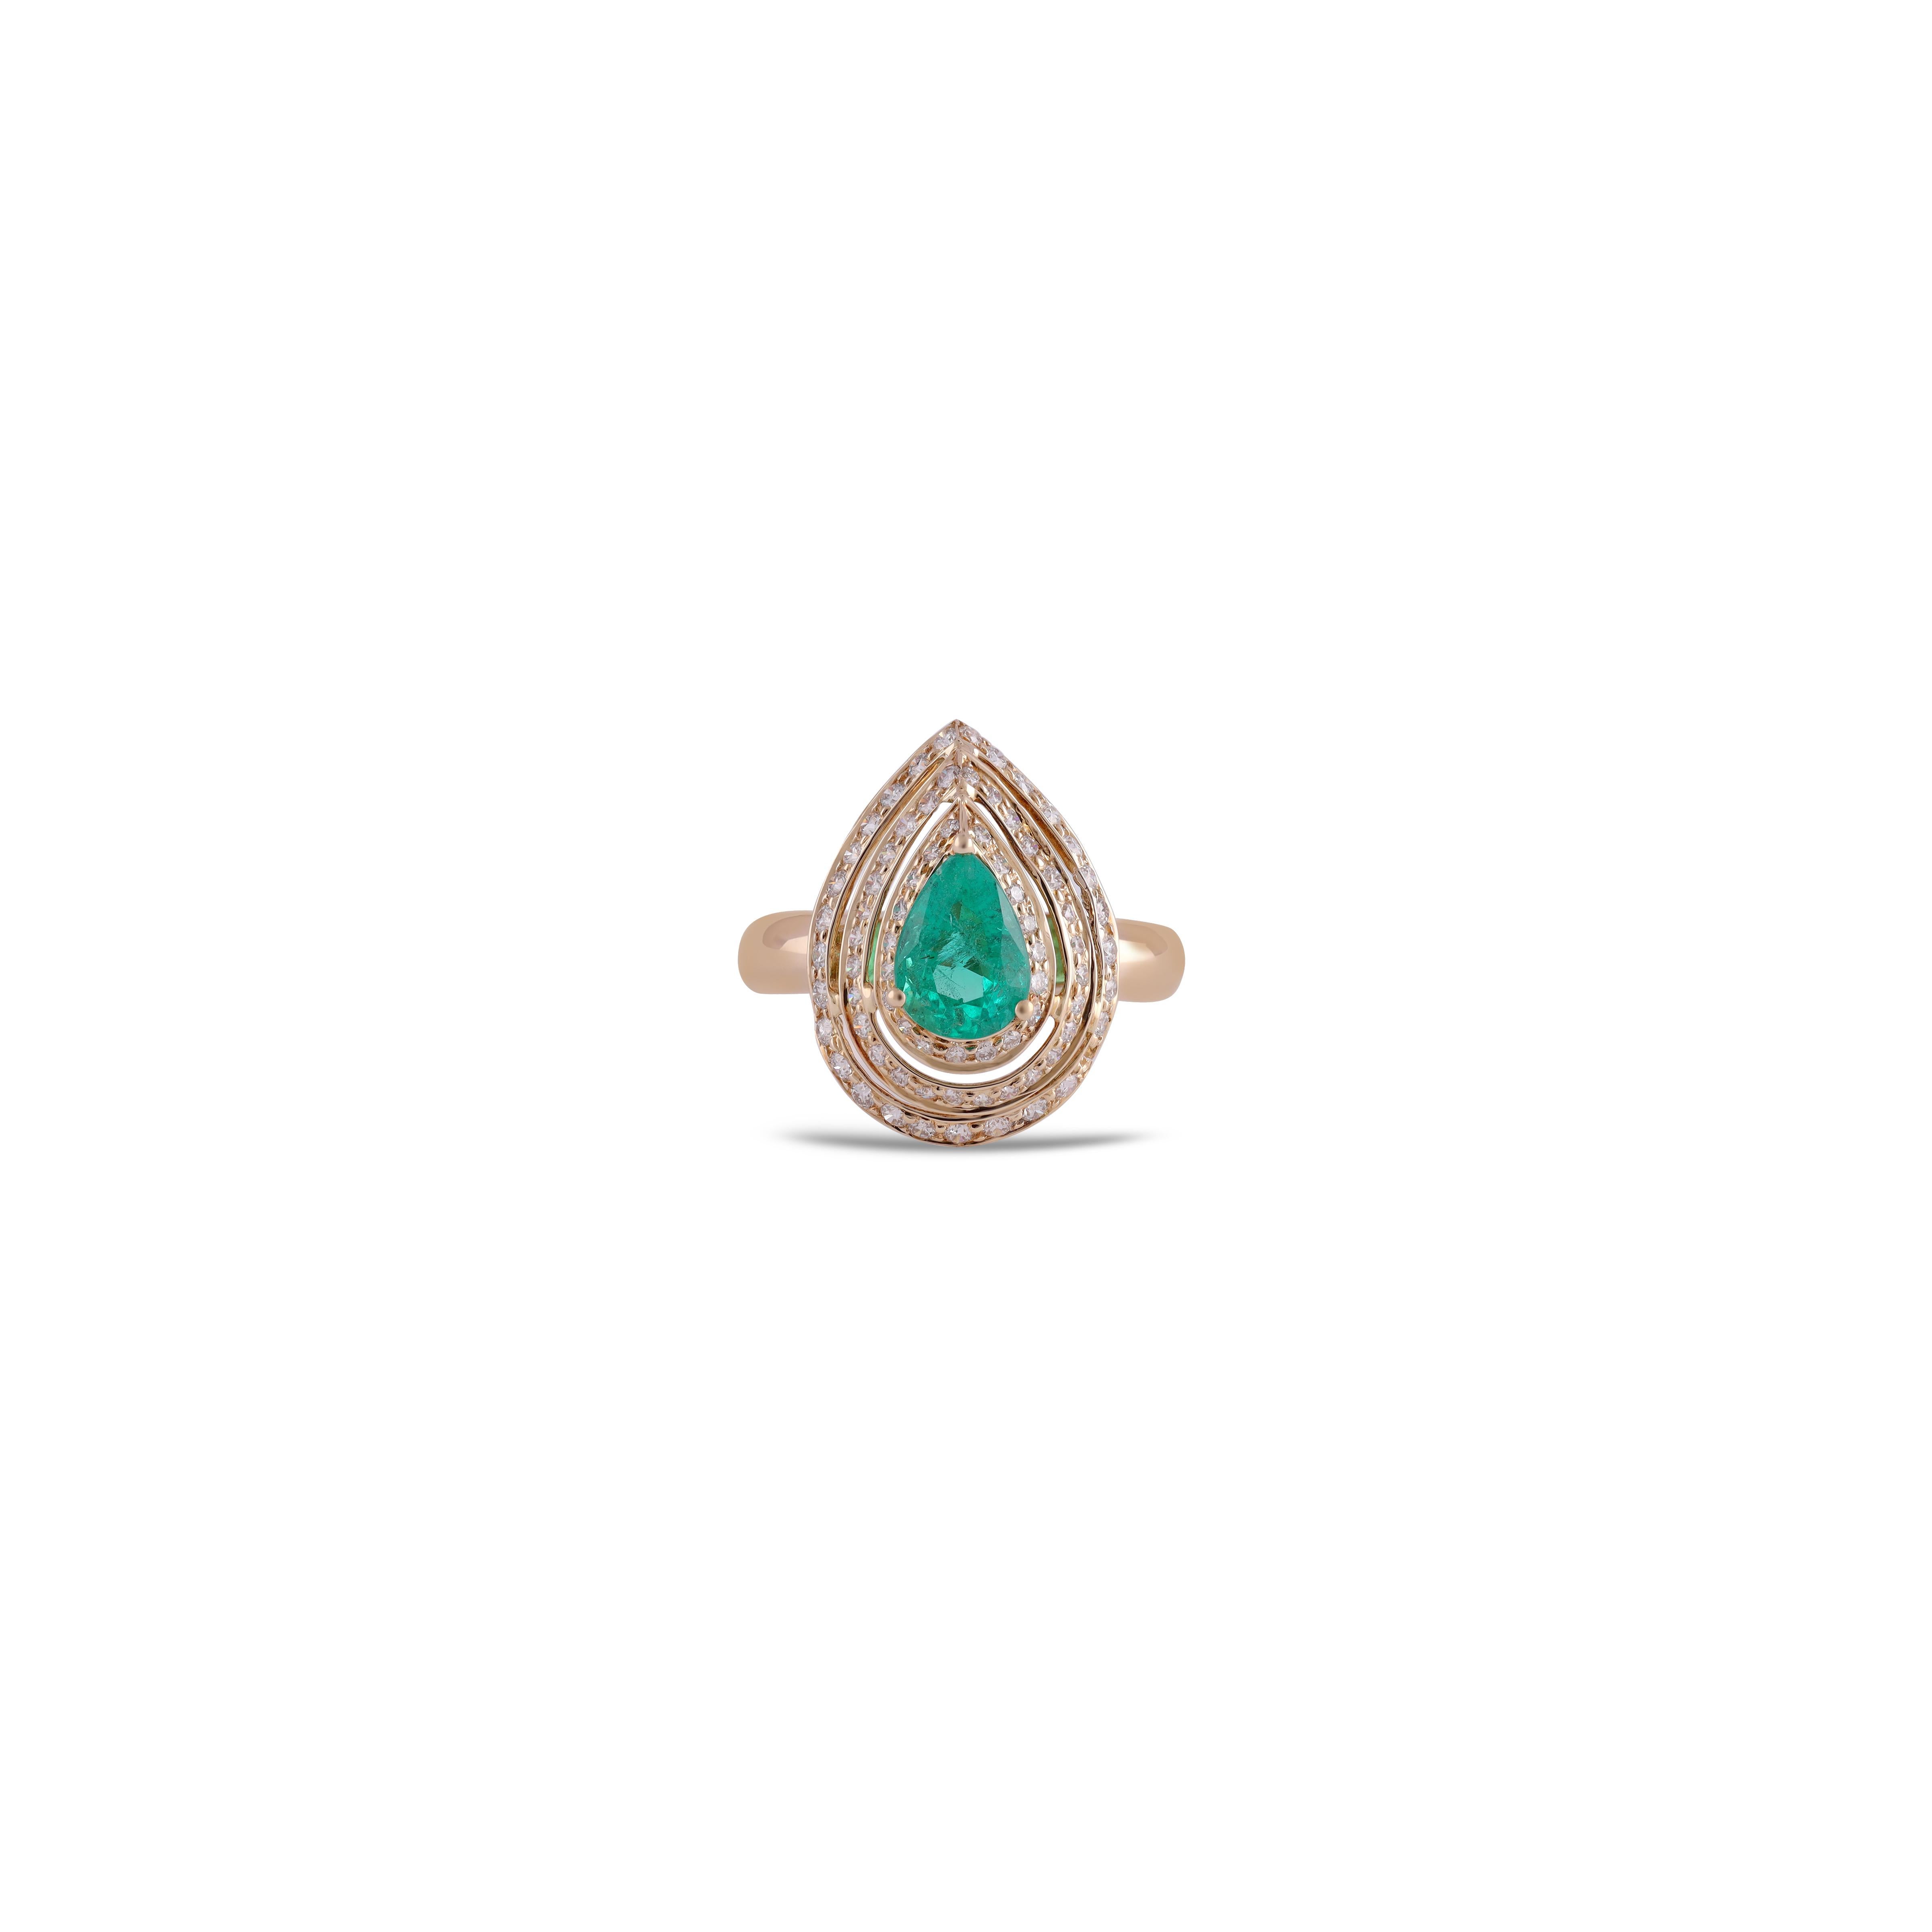 Product Details

→™ Jewelry Type - Rings
→™ Jewelry Main Material - 18K Gold, 18K Gold

Stone Details
→™ Primary Stone Type: Emerald  
→™ Primary Stone Details: Oiled
→™ Primary Stone Count: 1
→™ Total Primary Stone Carat Weight: 1.07